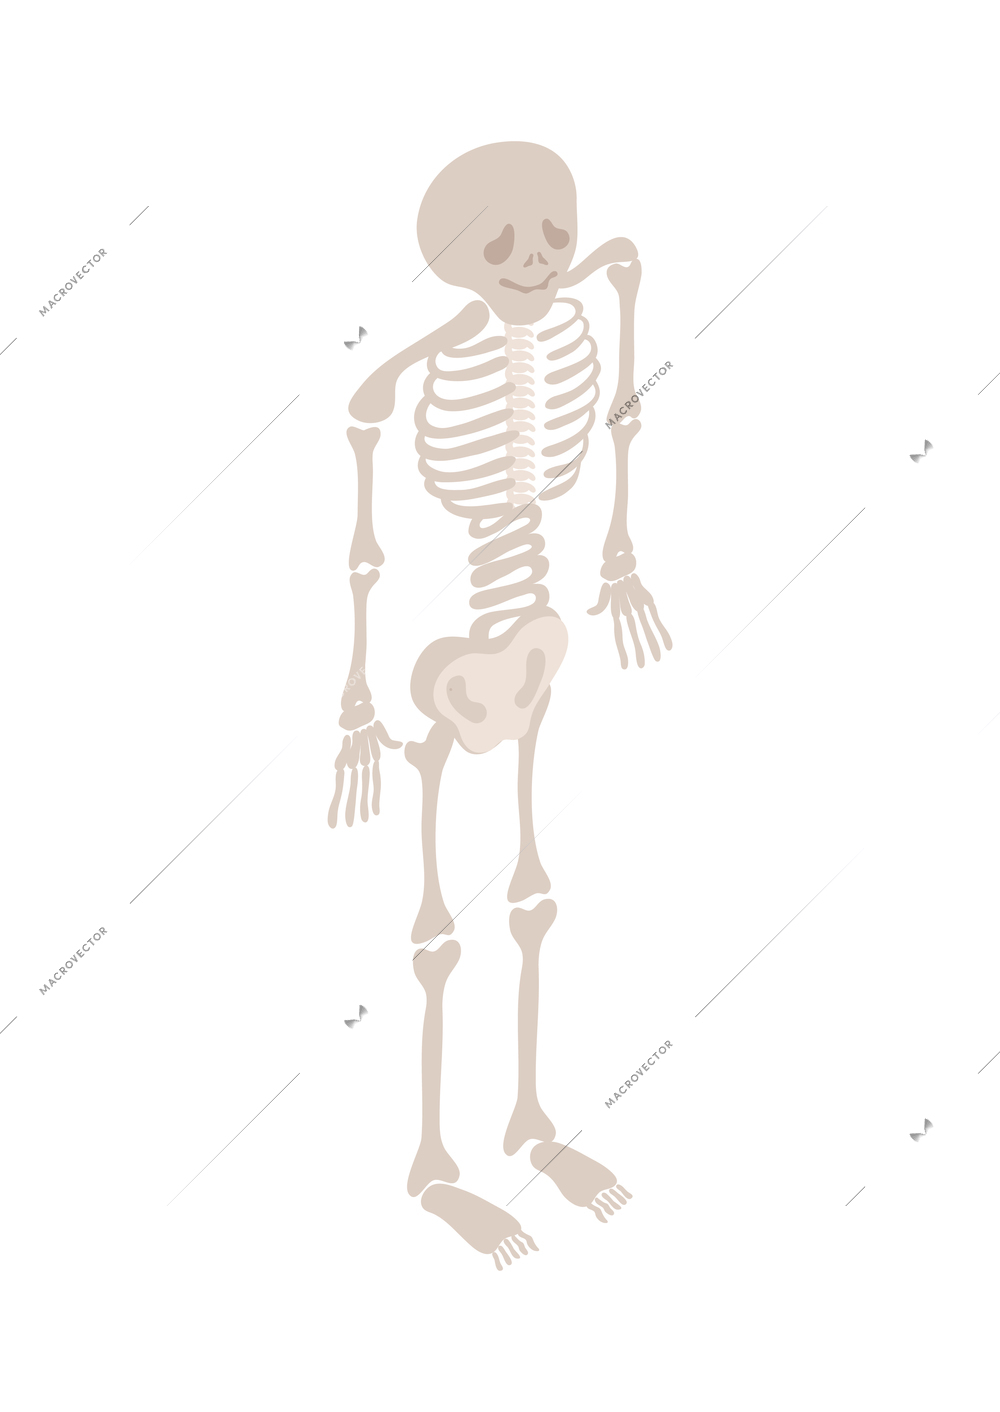 Intern medical students isometric composition with isolated image of human skeleton on blank background vector illustration